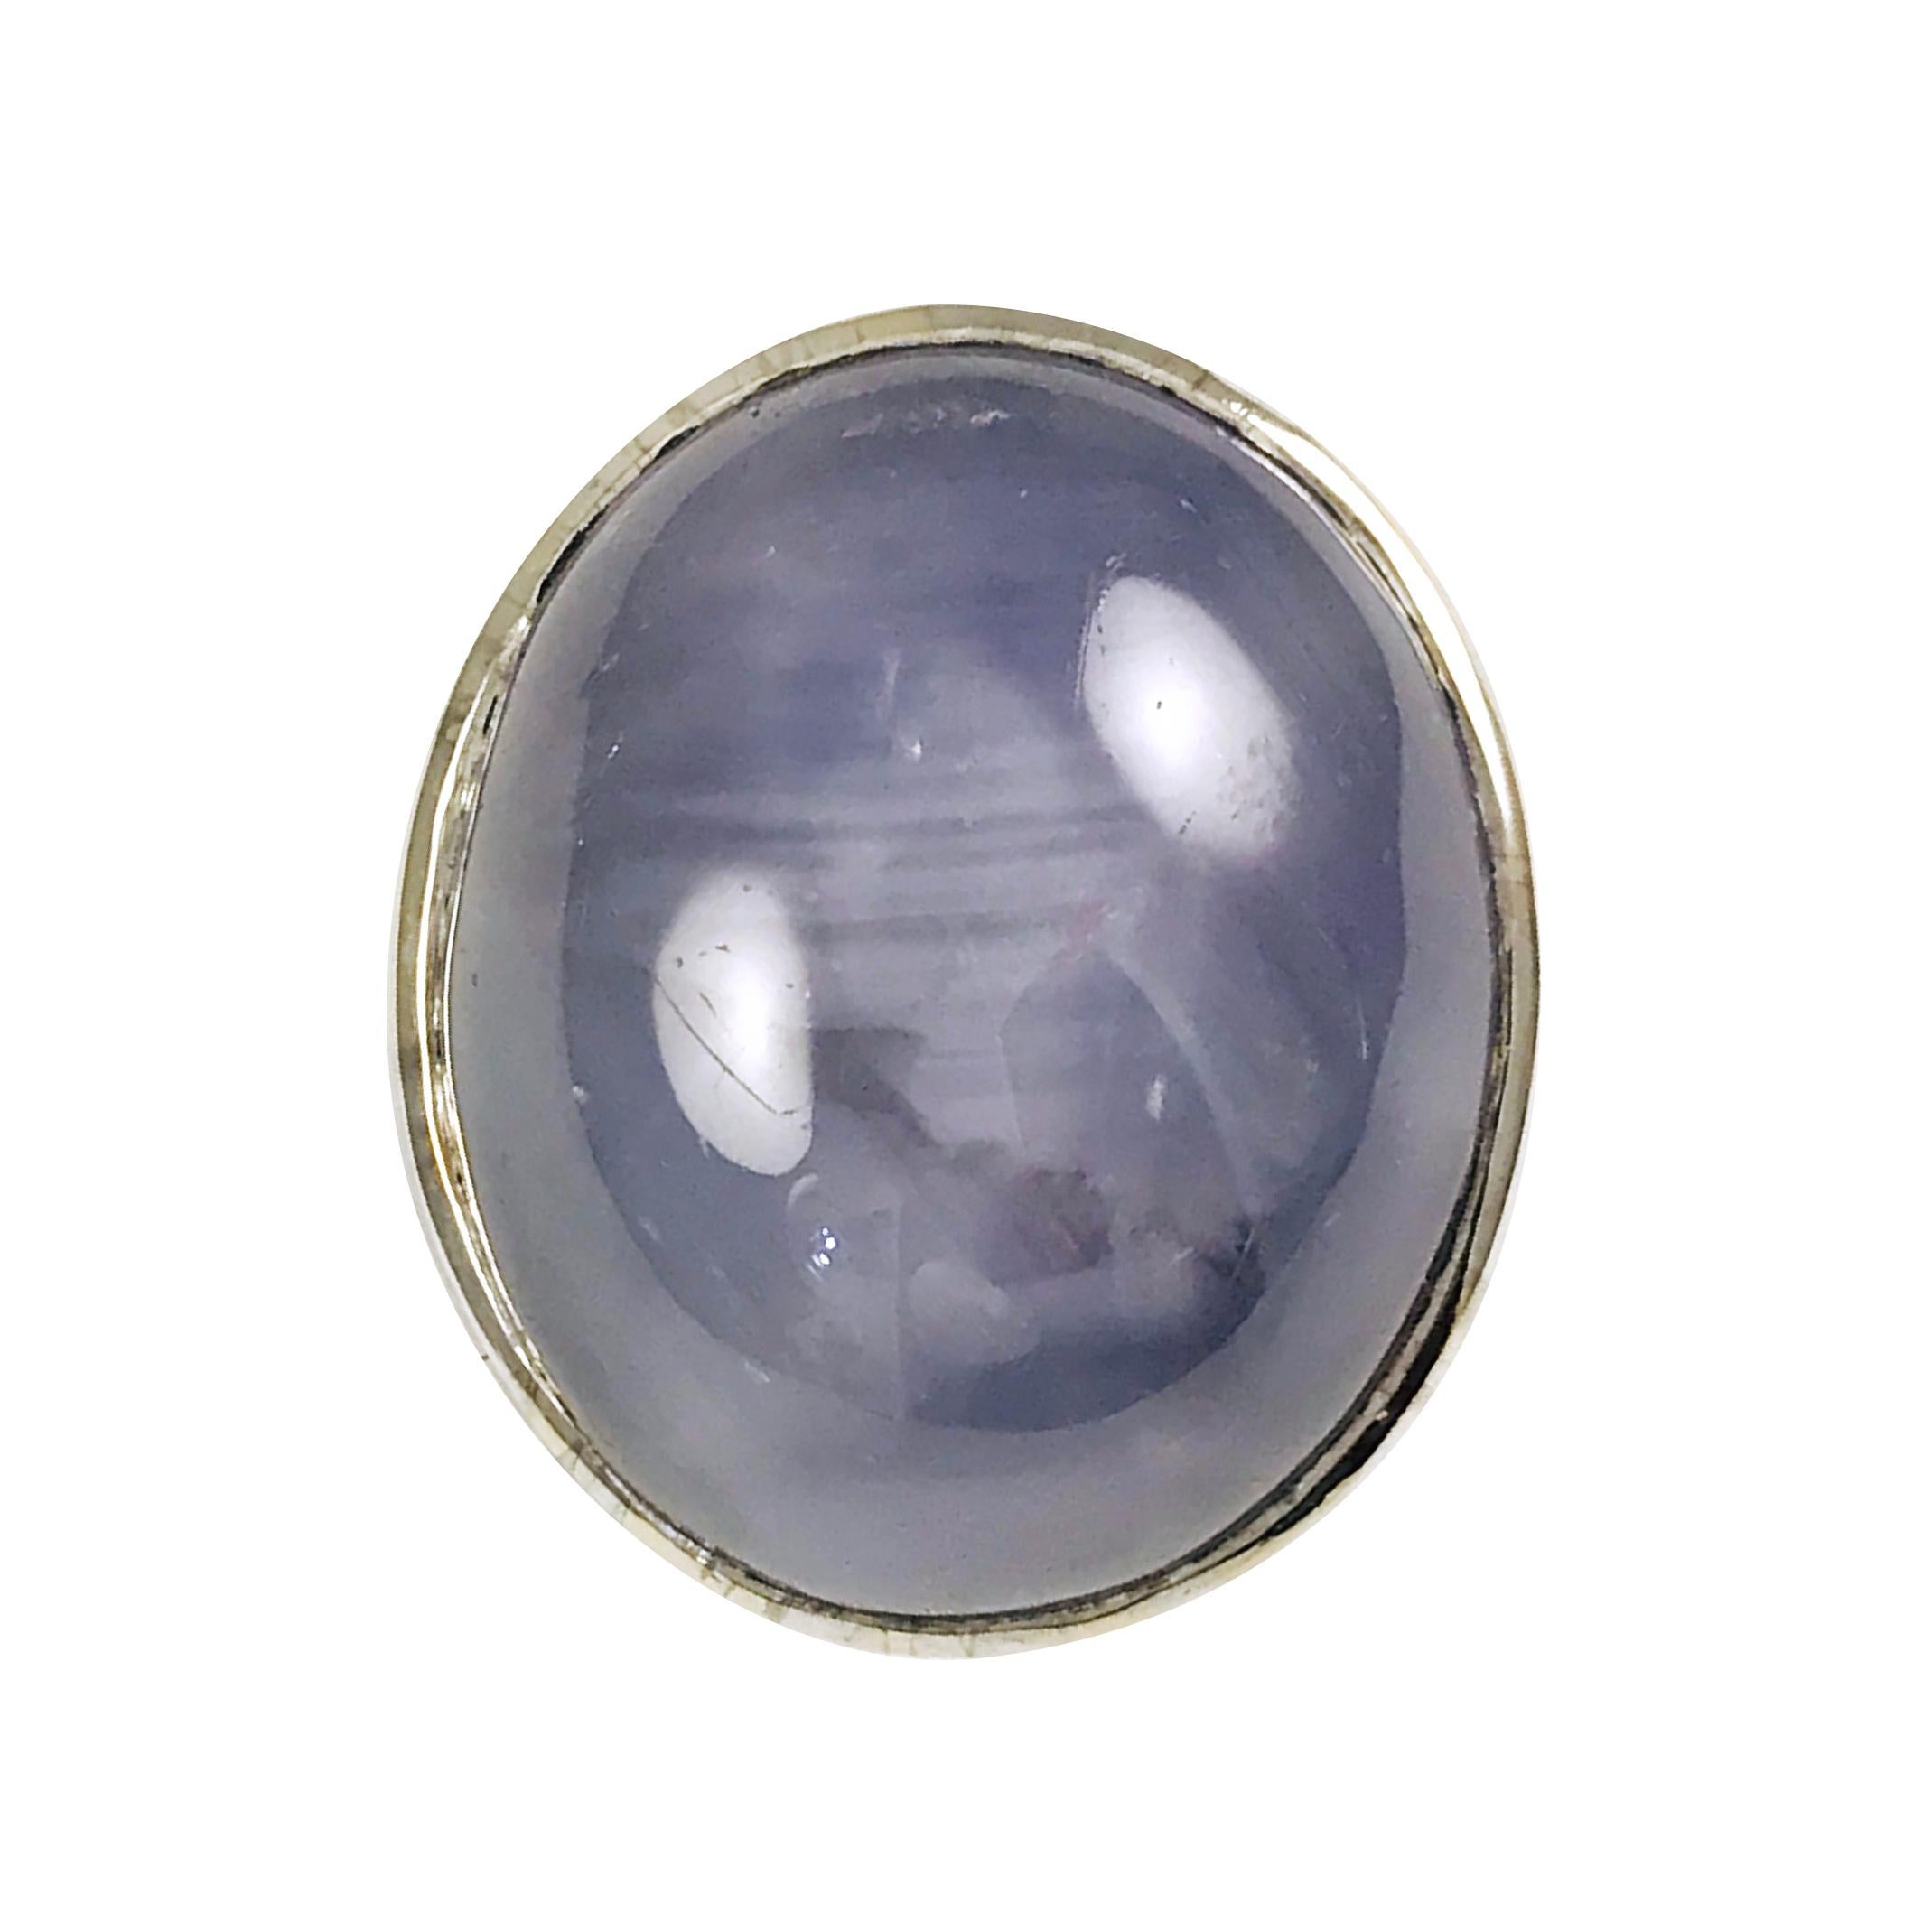 Gentleman's 18k White Gold Star Sapphire Ring. AIG Certified, appraisal #000719115072. The ring size is 9.

Electrically tested 18k white gold gents cast star sapphire ring. The condition is good. 

The bezel-set blue star sapphire is supported by